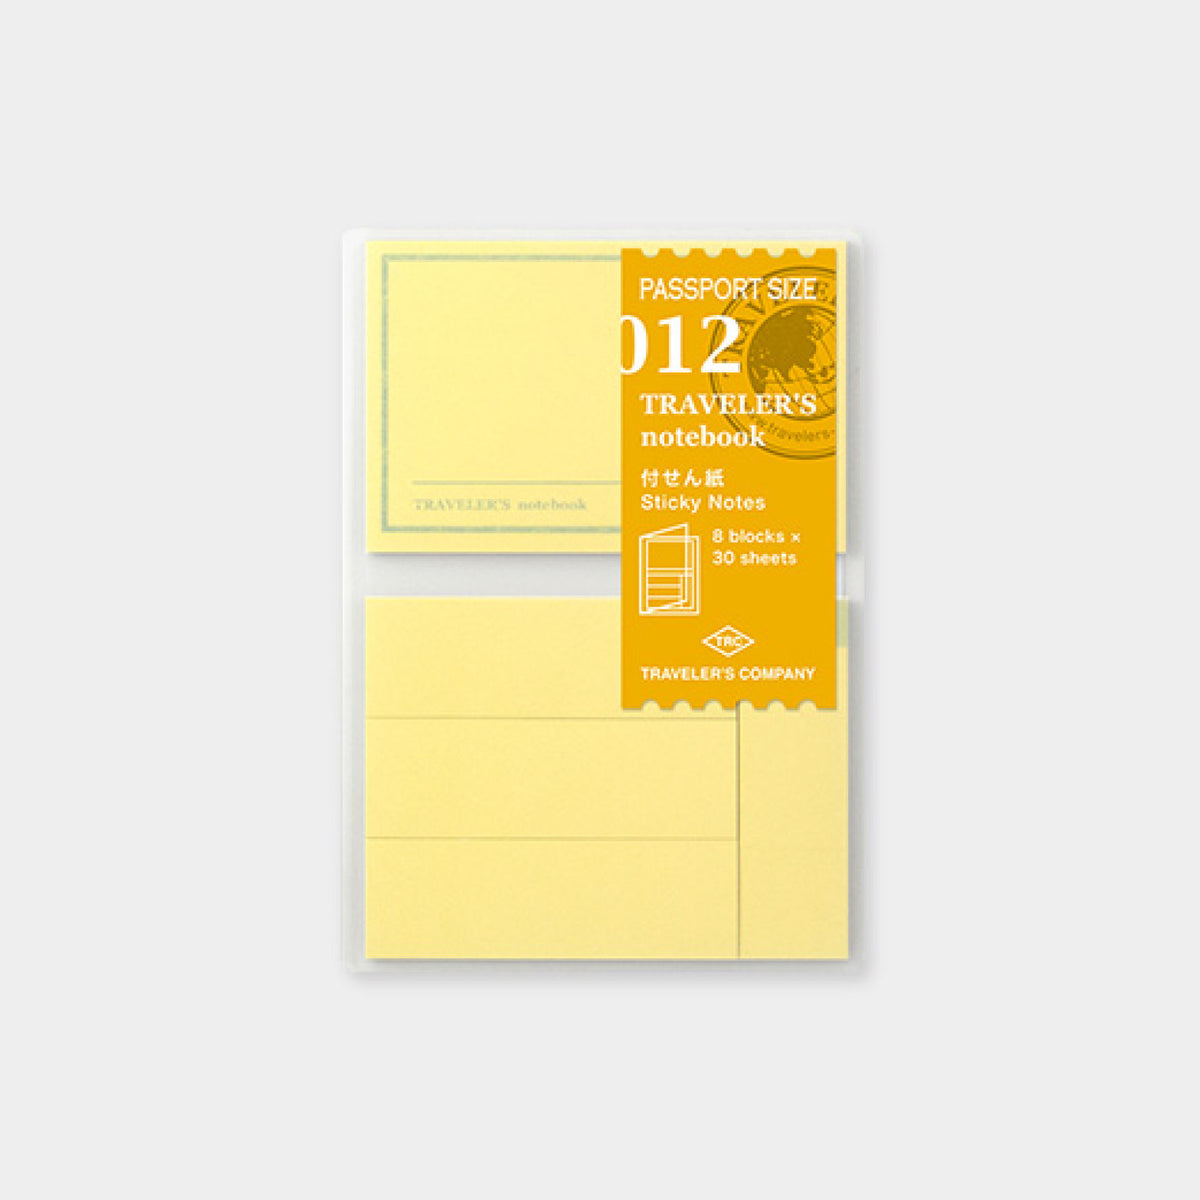 Traveler's Company - Inserts - Passport - 012 Sticky Notes <Outgoing>